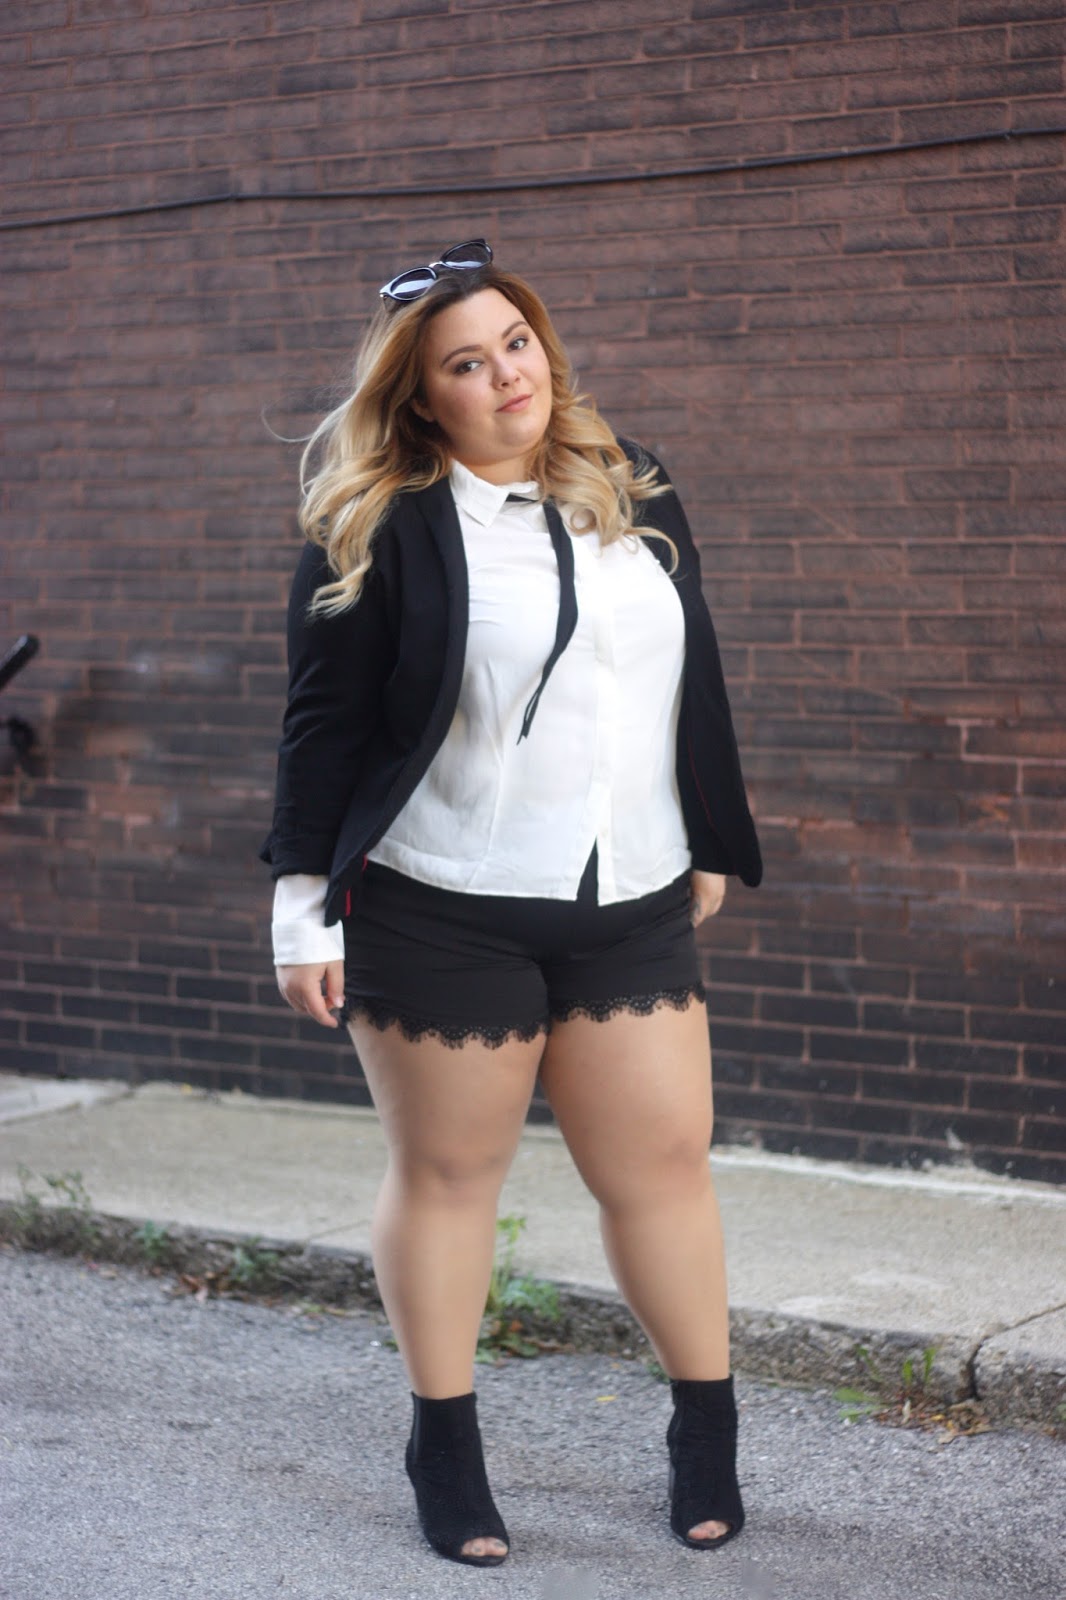 natalie craig, natalie in the city, curvy girl fashion, bow tie blouse, suzy shier, canada fashion, plus size lace shorts, plus size fashion, chicago blogger, midwest blogger, natalieinthecoty.com, plus size blazer, open toed perforated booties, karl lagerfeld, college fashion week, fatshion